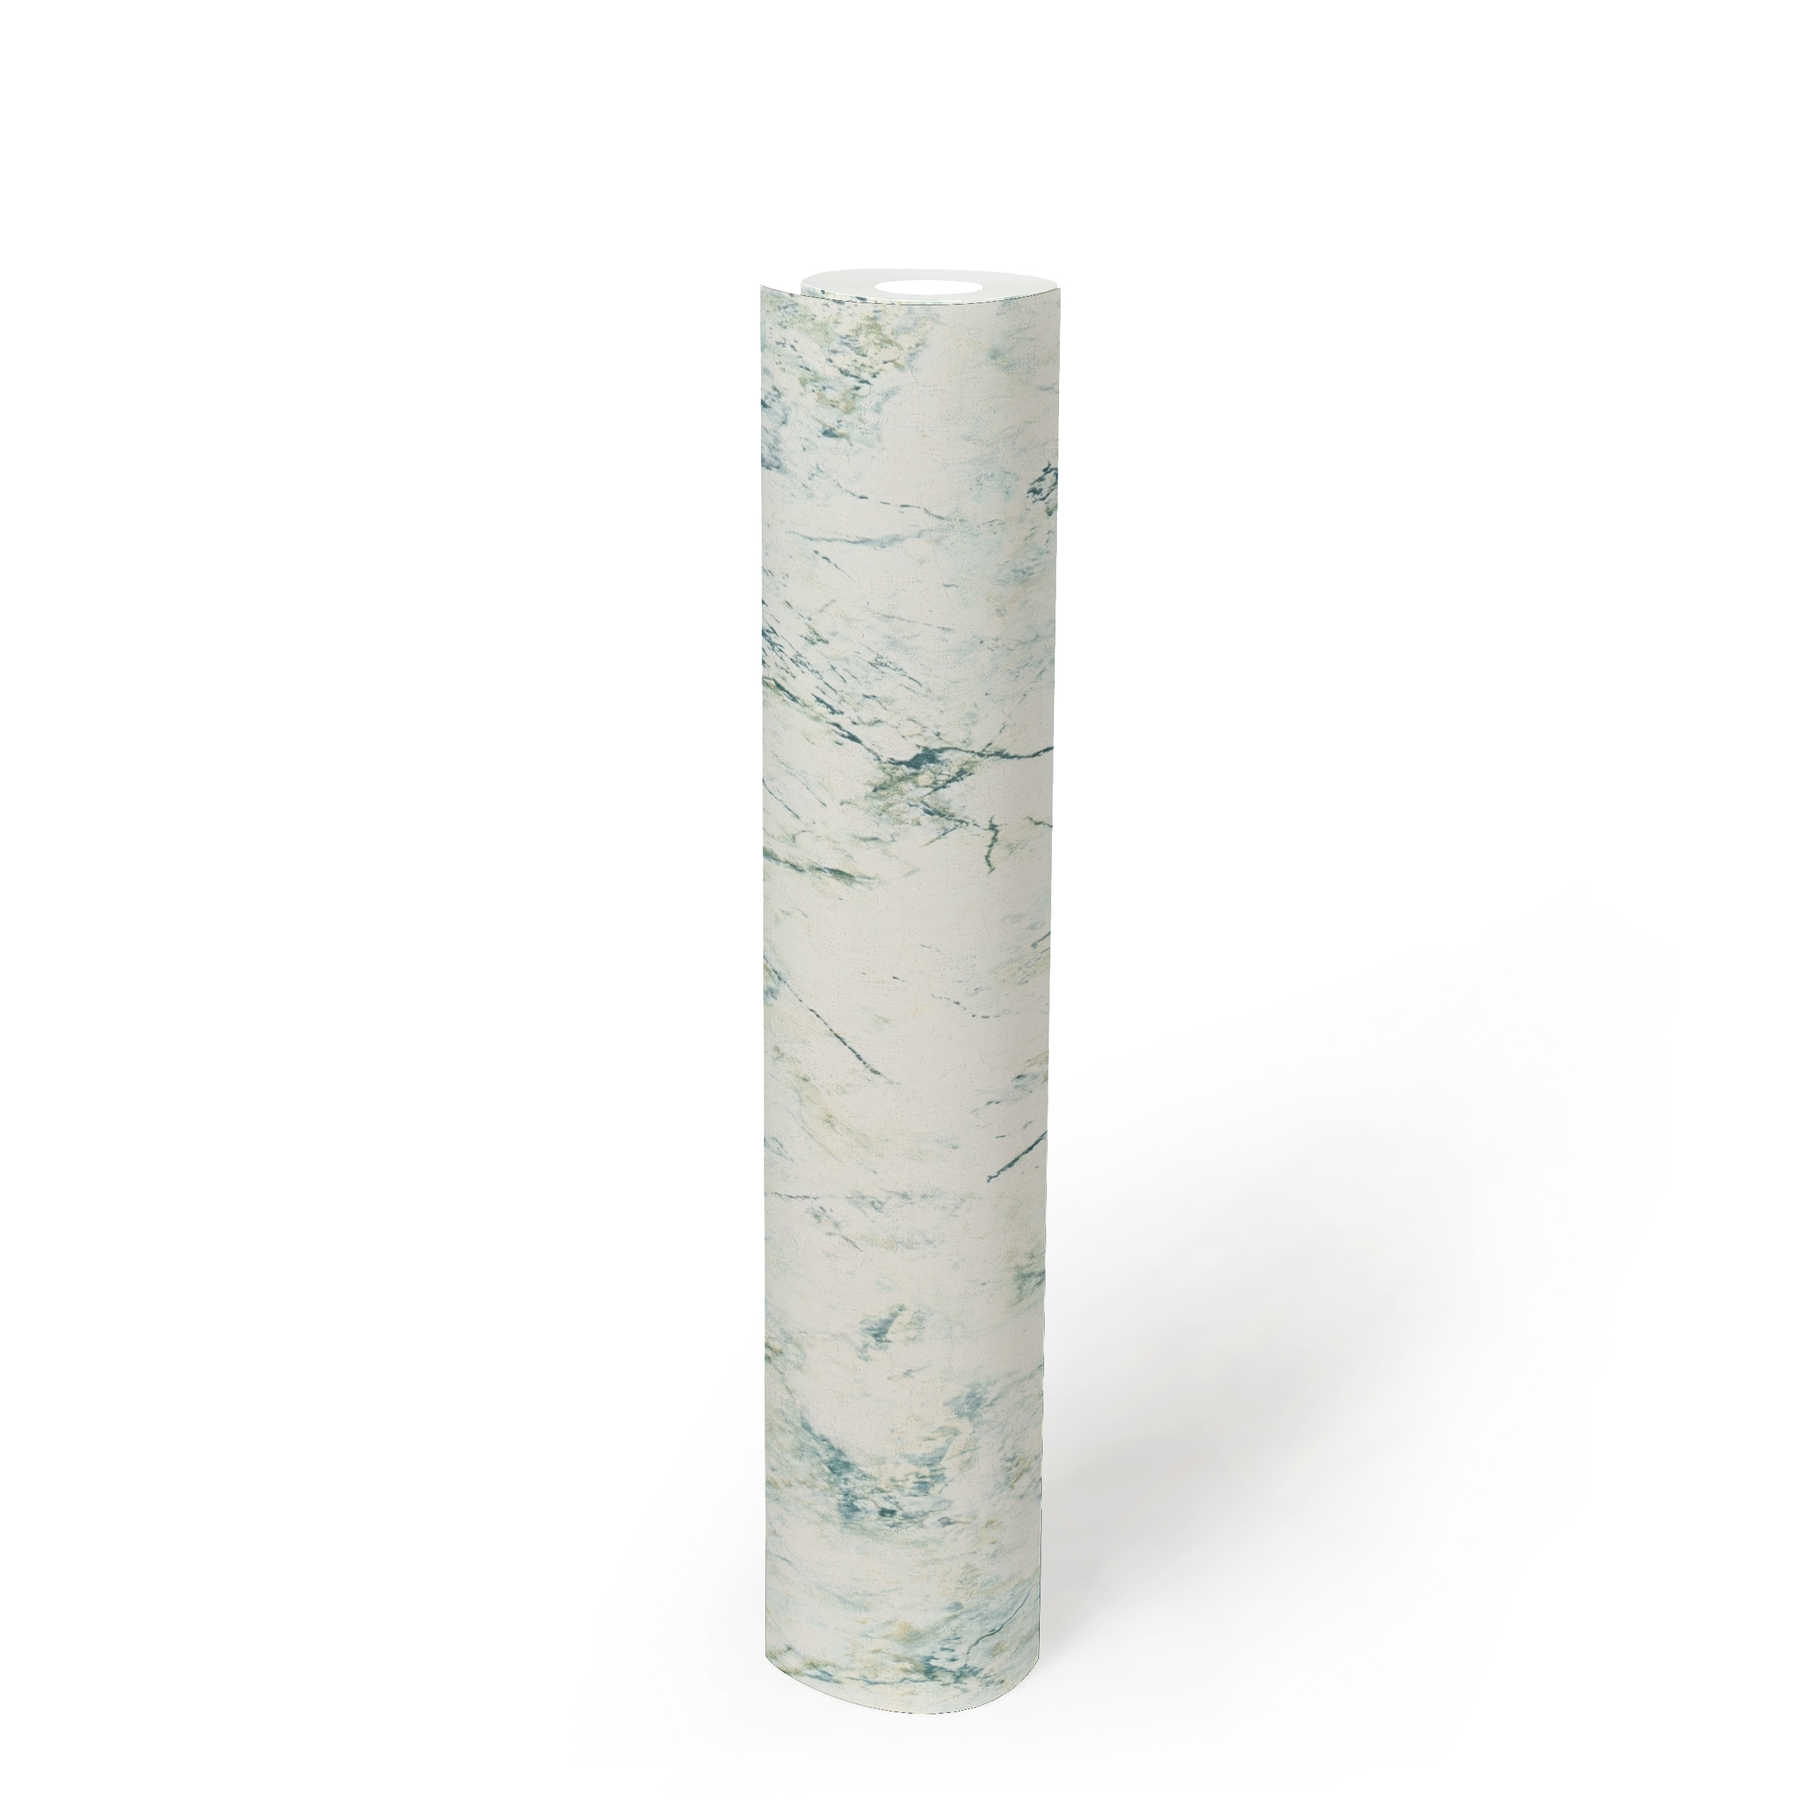             Non-woven wallpaper with fine marble look - white, grey, black, blue
        